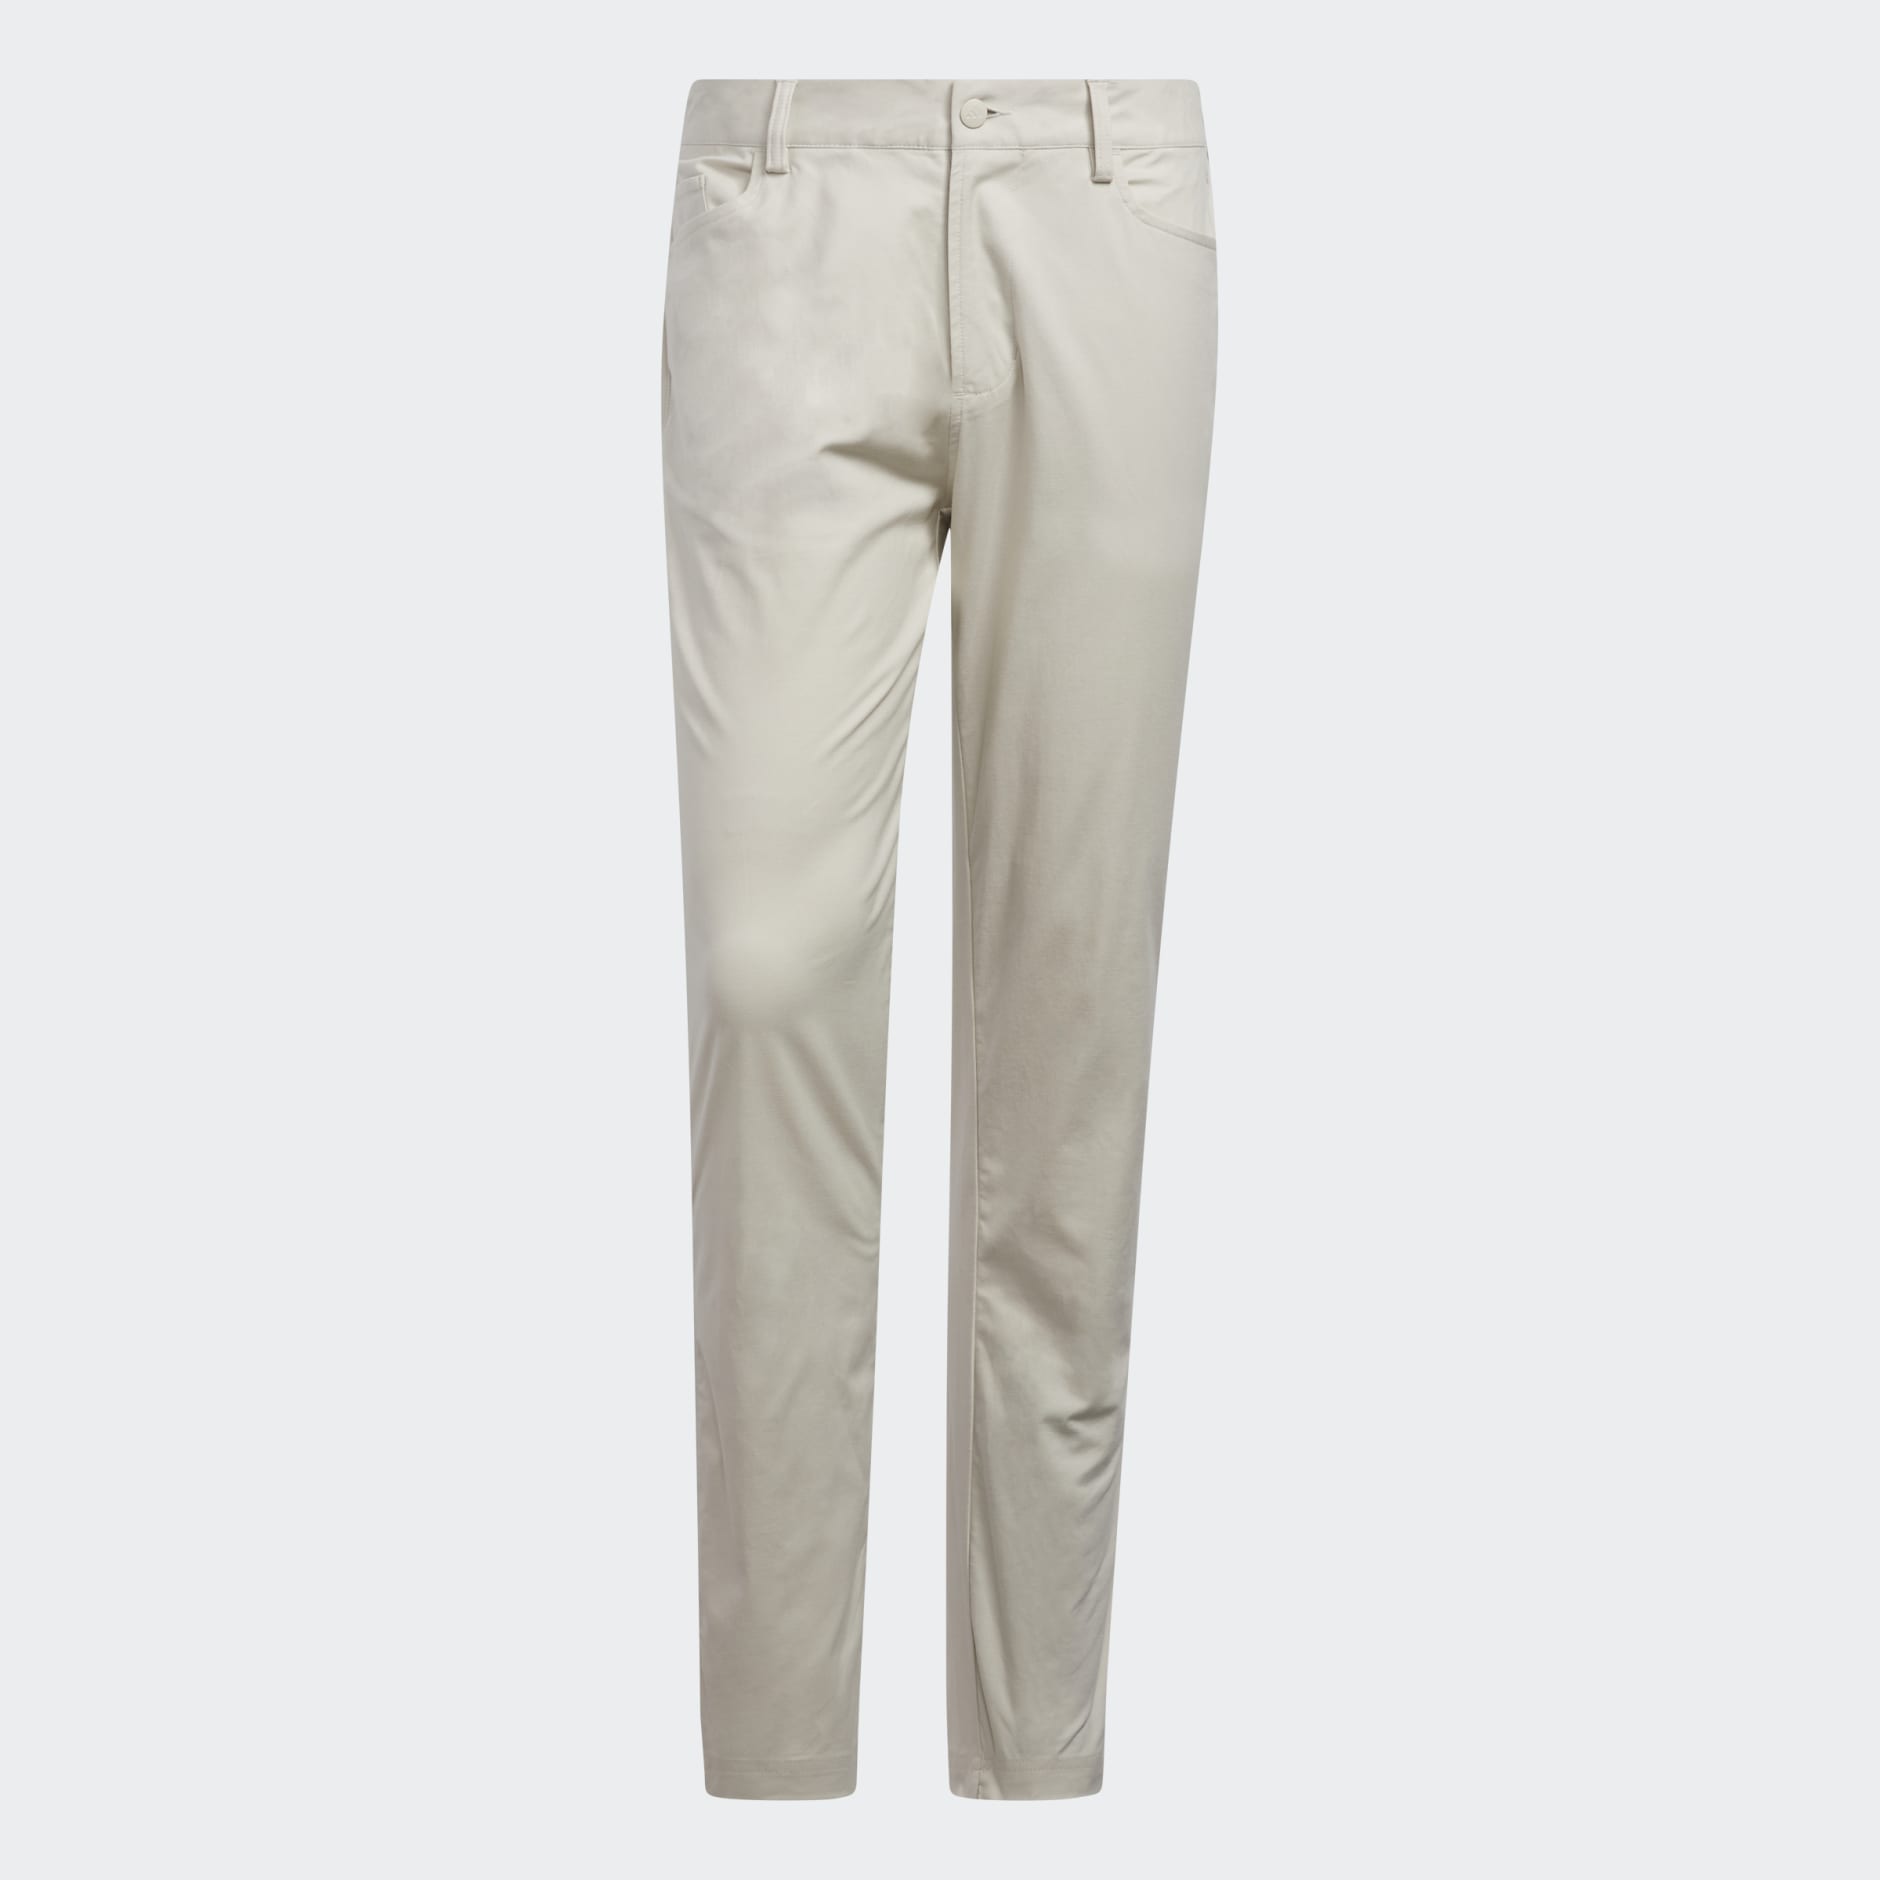 Clothing - Go-To 5-Pocket Golf Pants - Beige | adidas South Africa